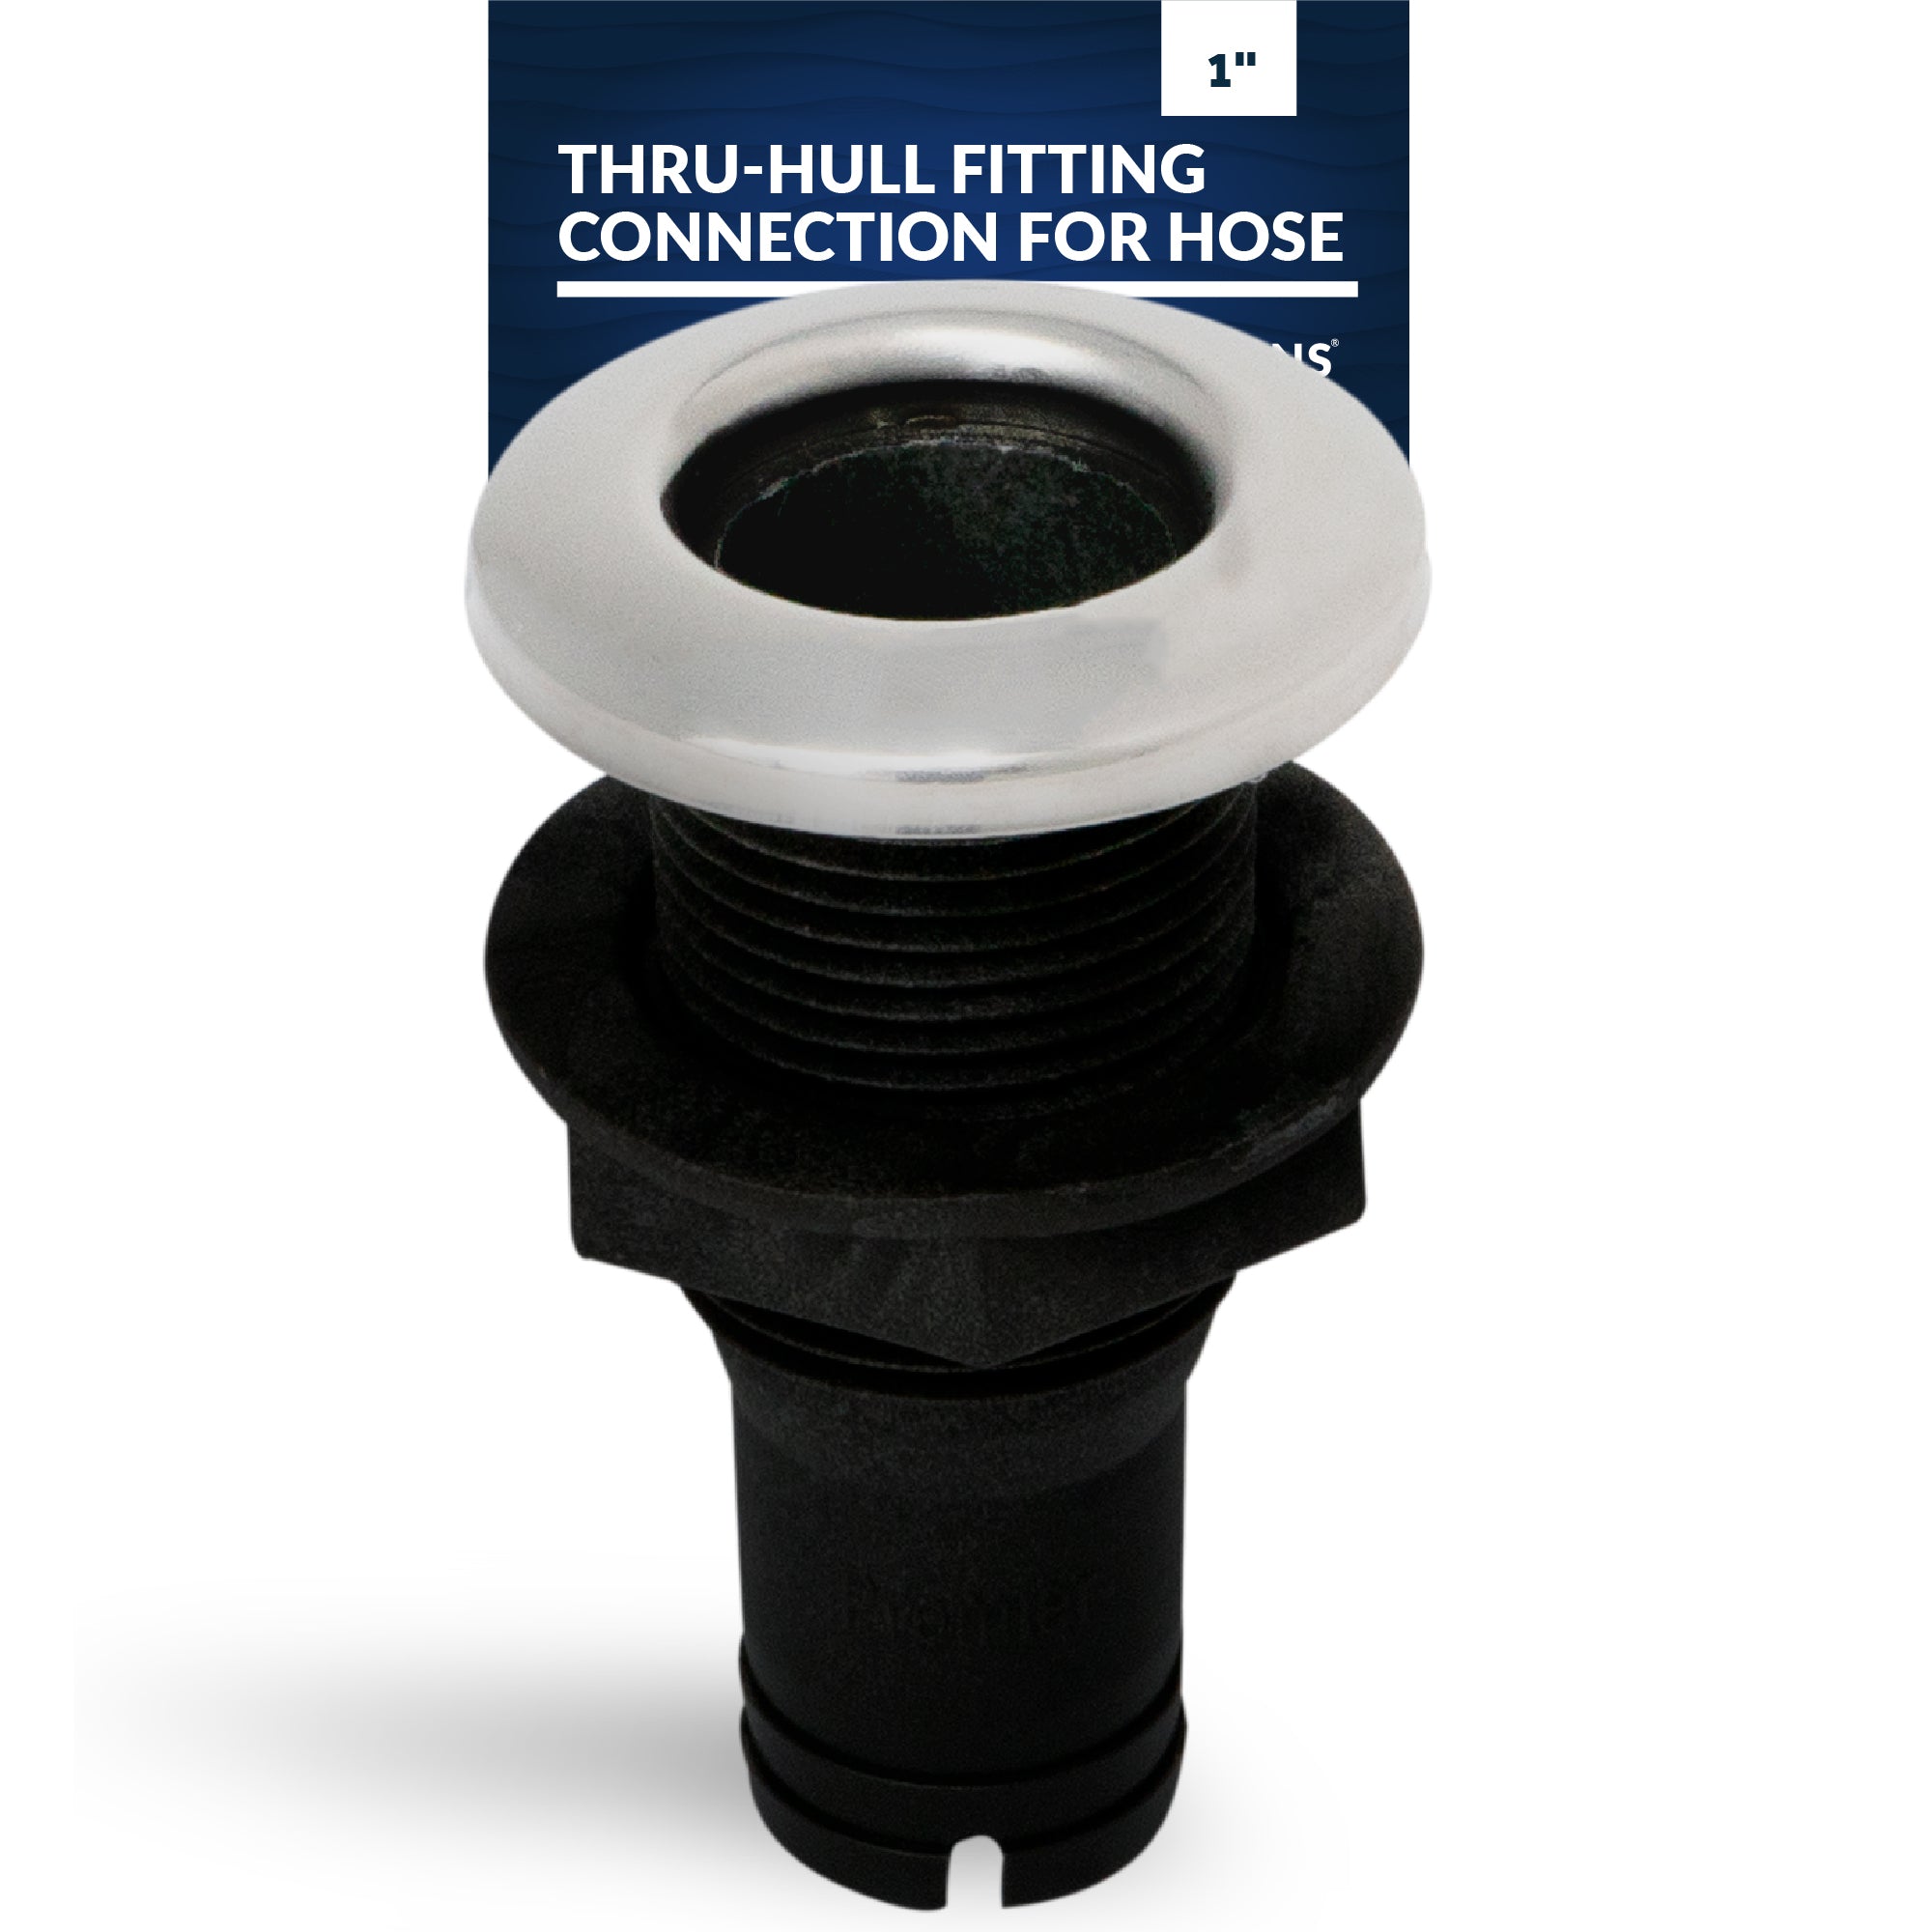 Thru-Hull Fitting Connection for Hose, 1" Black - FO2996